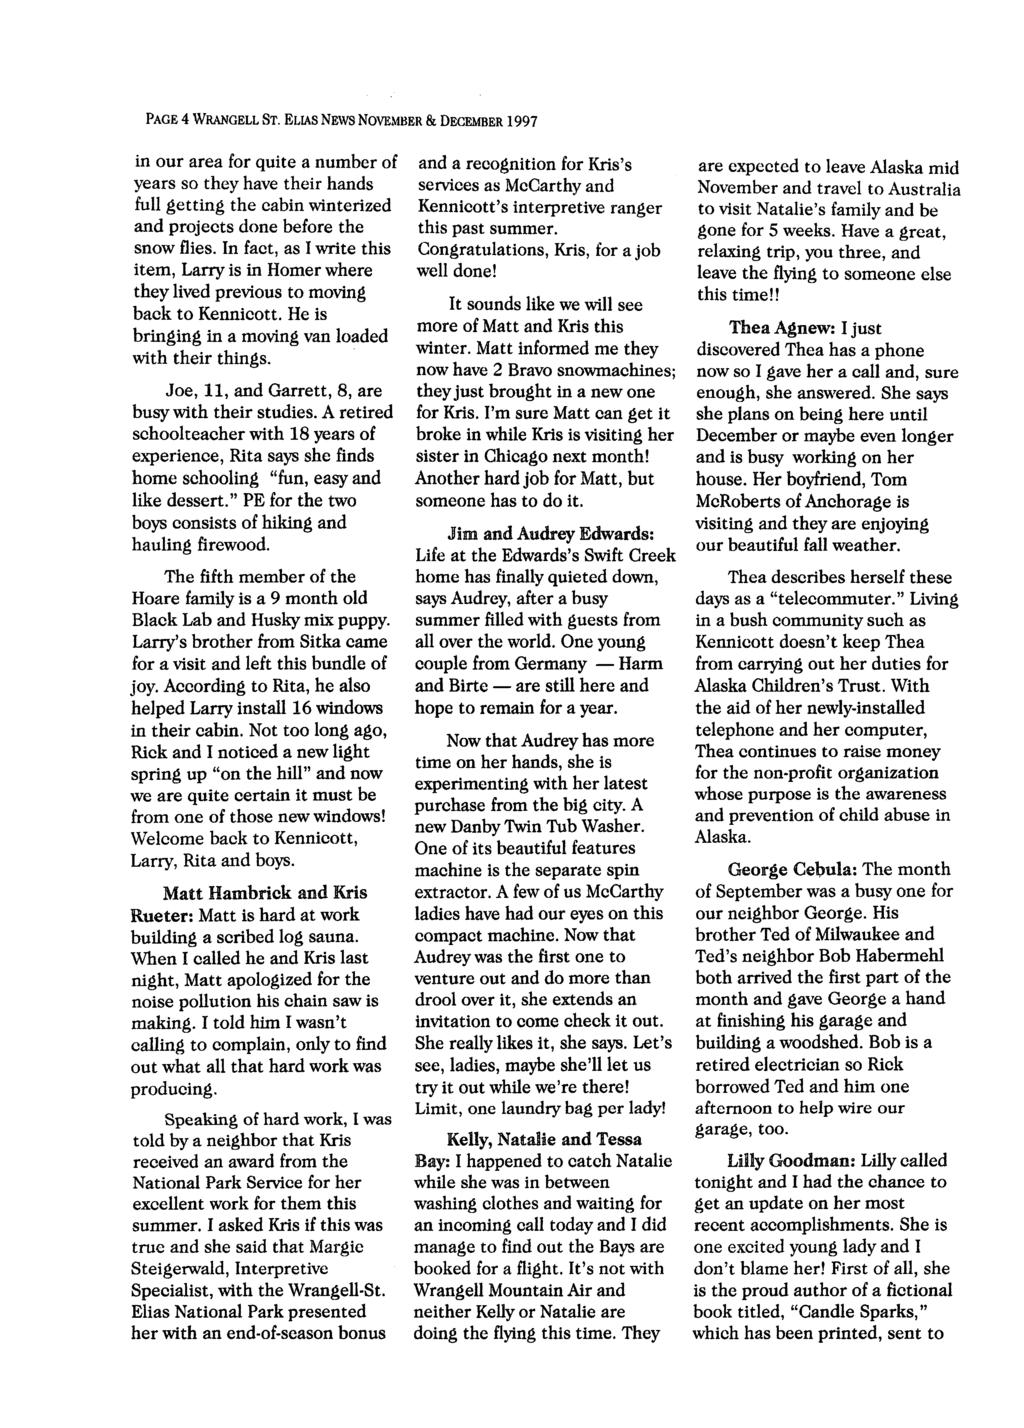 PAGE 4 WRANGELL ST. ELIAS NEWS NOVEMBER & DECEMBER 1997 in our area for quite a number of years so they have their hands full getting the cabin winterized and projects done before the snow flies.